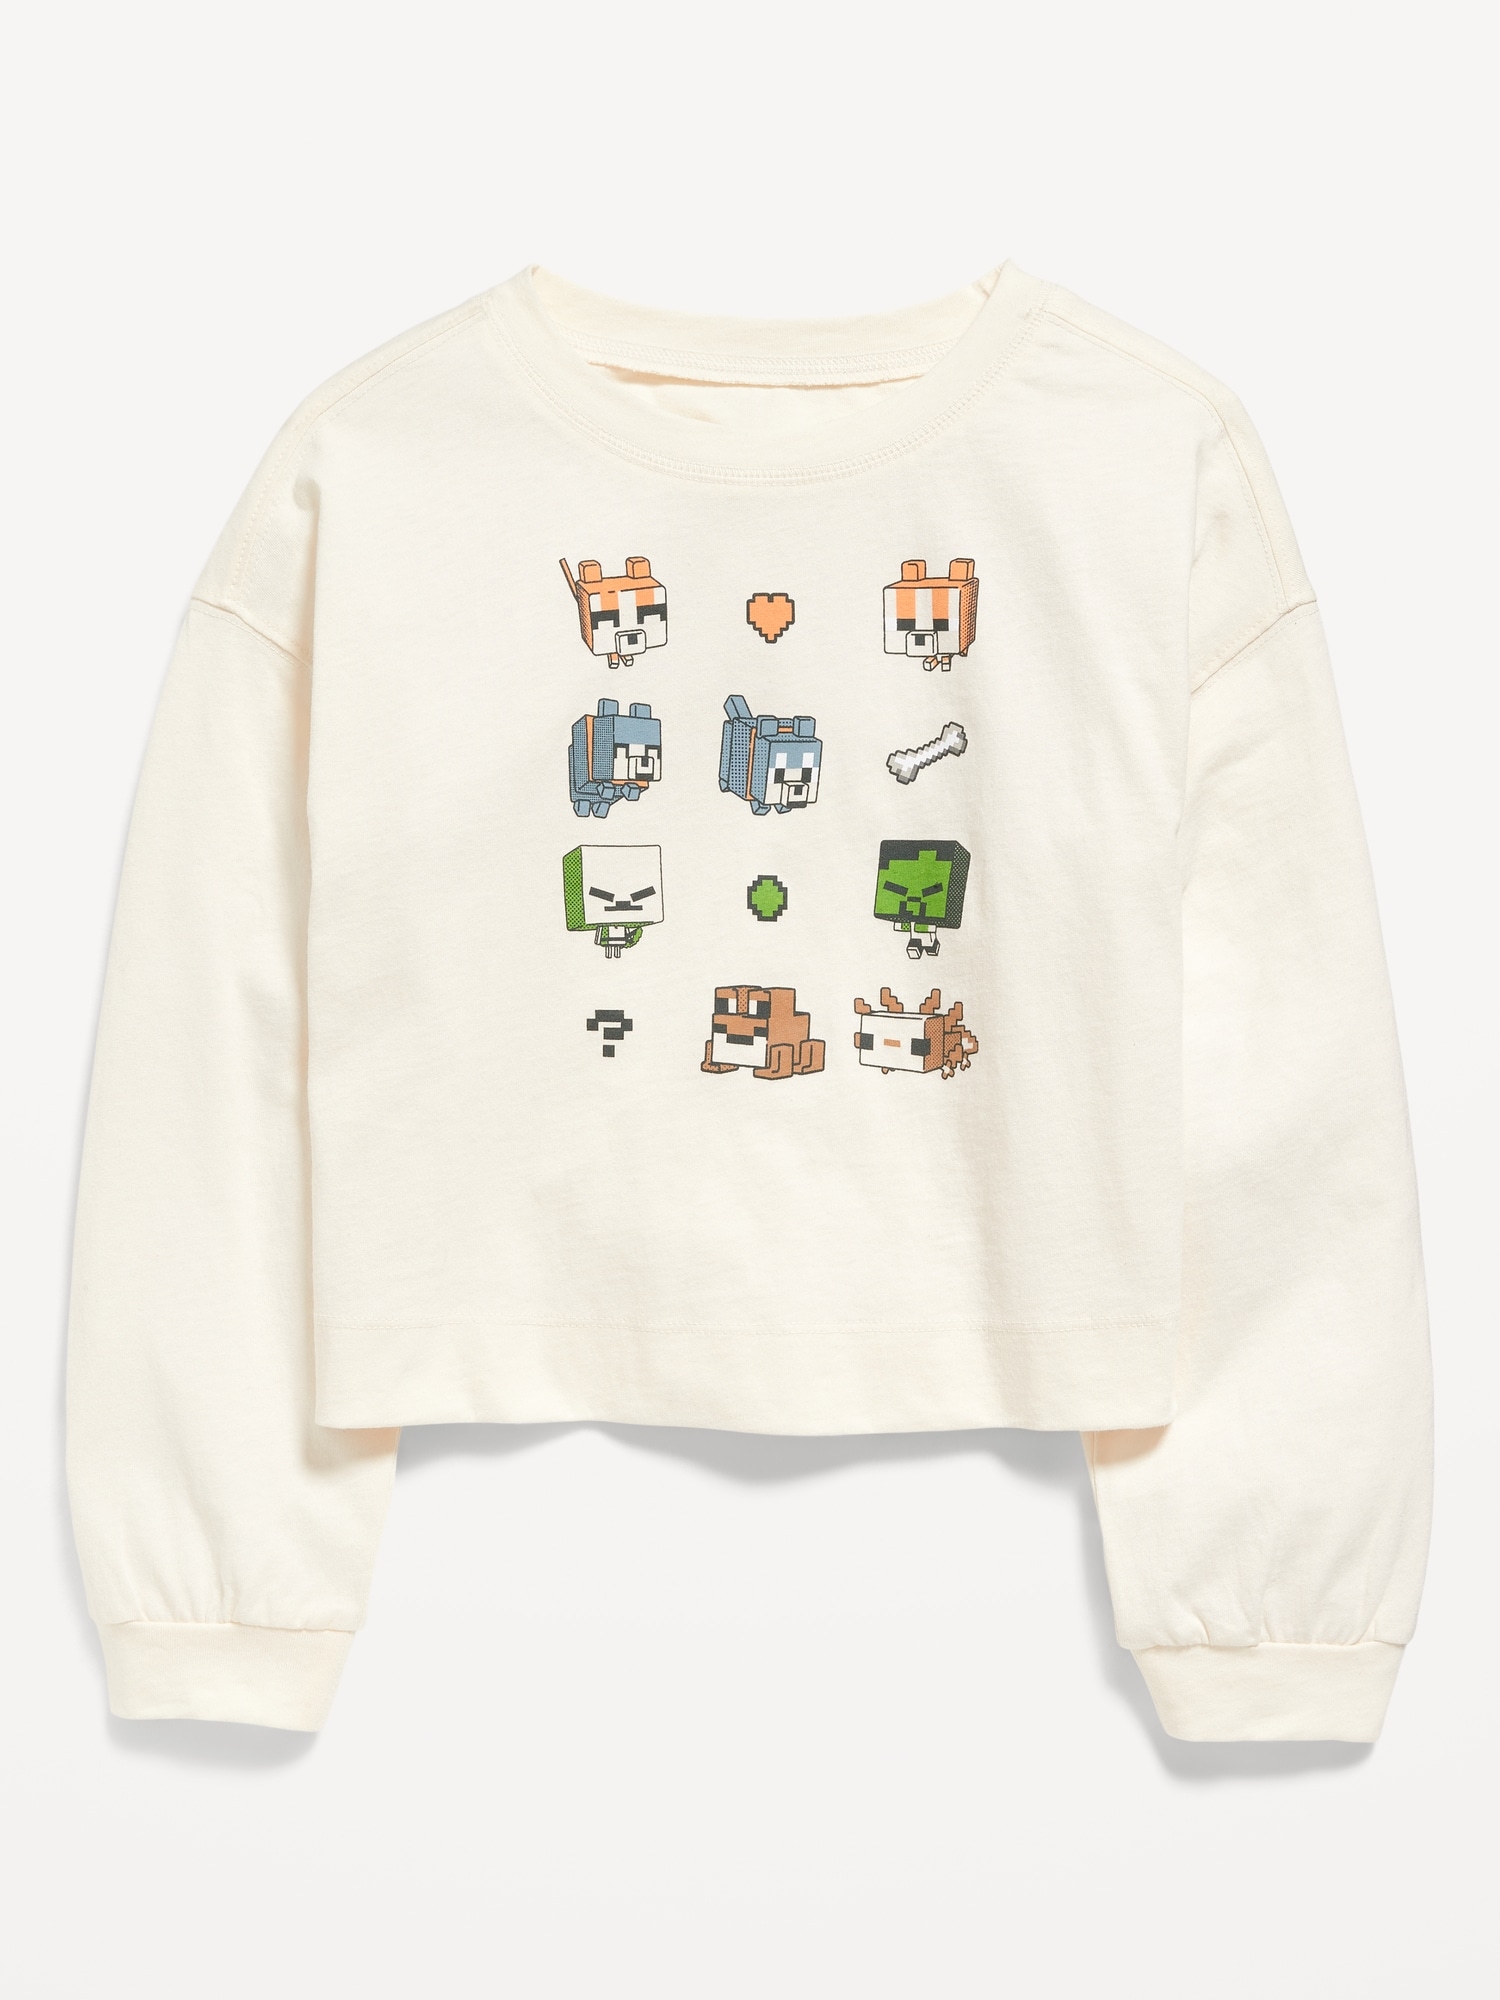 Long-Sleeve Licensed Pop Culture Graphic T-Shirt for Girls